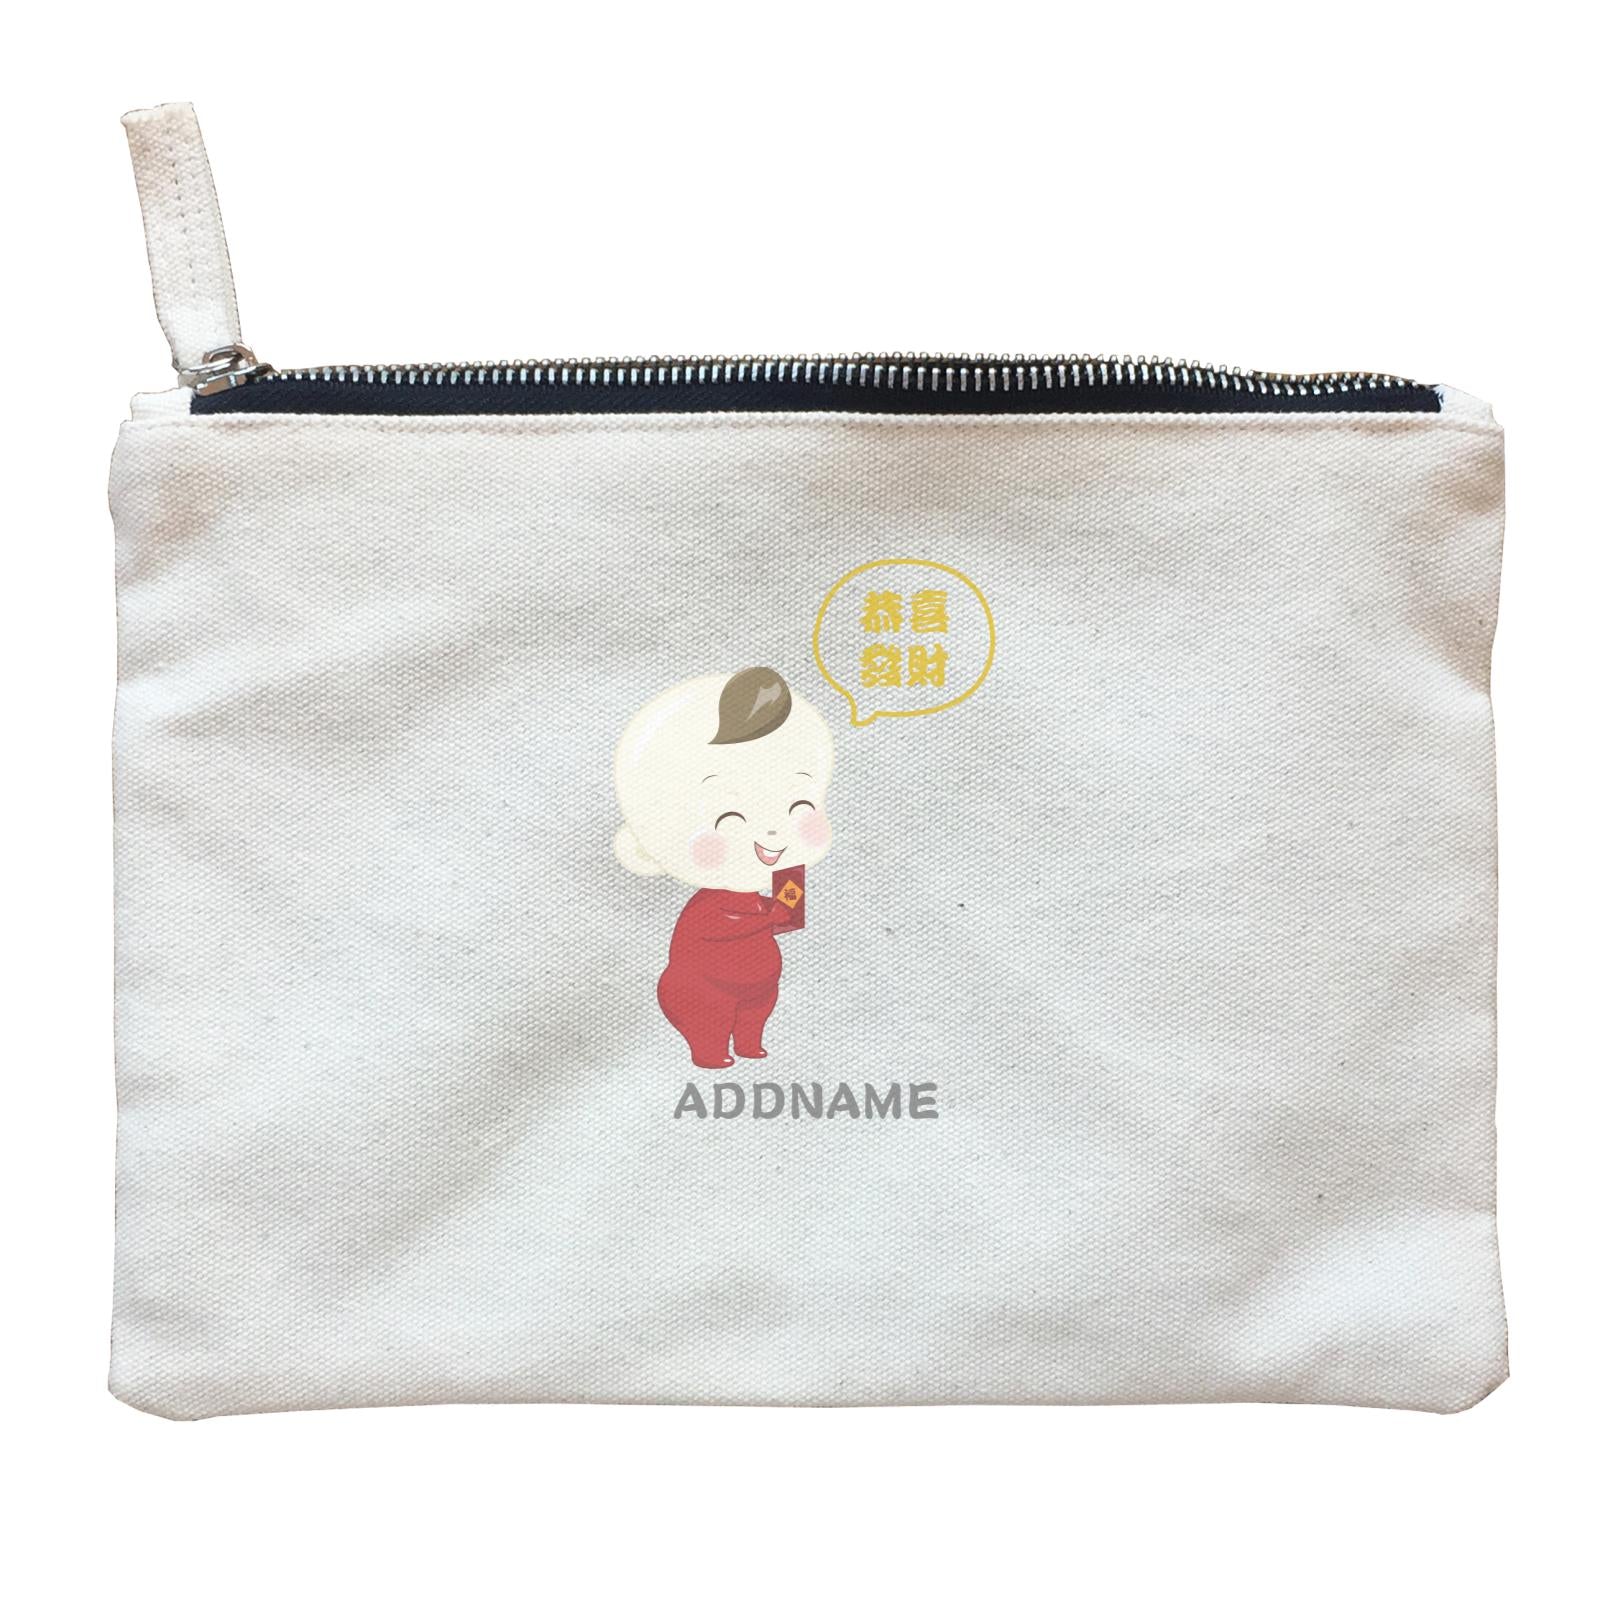 Chinese New Year Family Gong Xi Fai Cai Baby Boy Addname Zipper Pouch